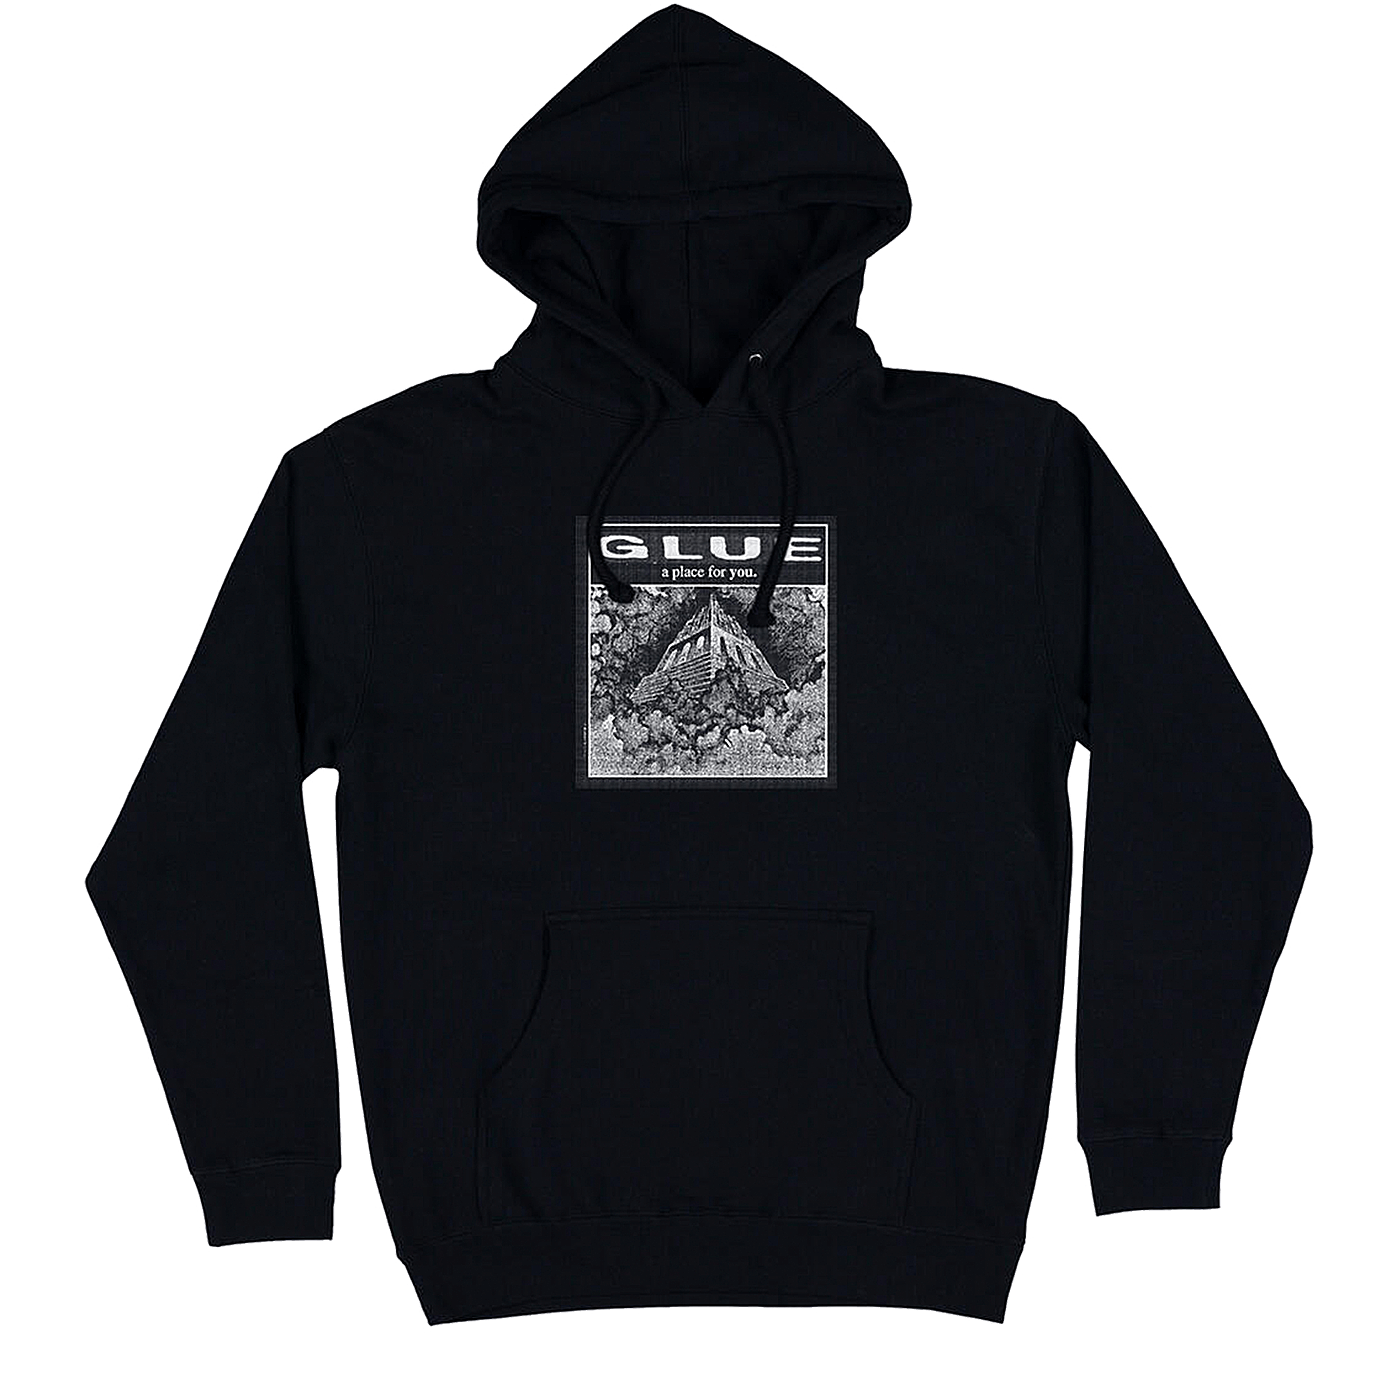 Glue Skateboards A Place For You Hoodie Black